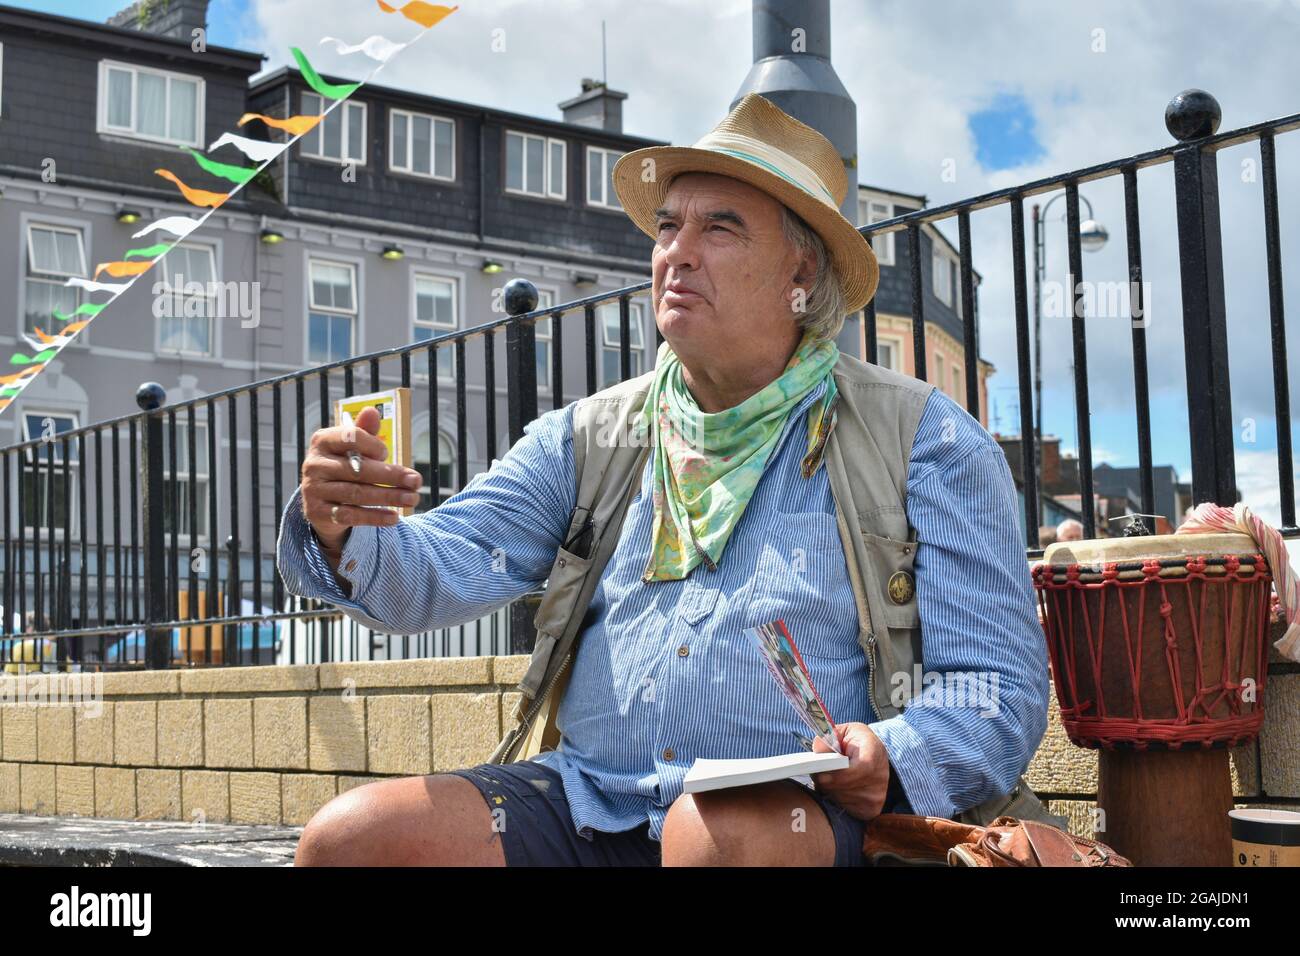 Bantry, West Cork, Ireland. 30th July 2021. Ian Bailey’s appeal against his conviction for drug driving and the possession of drugs has been adjourned until October. Pictured below Ian Bailey at Bantry market selling books and signing them. Credit: Karlis Dzjamko/Alamy Live News Stock Photo